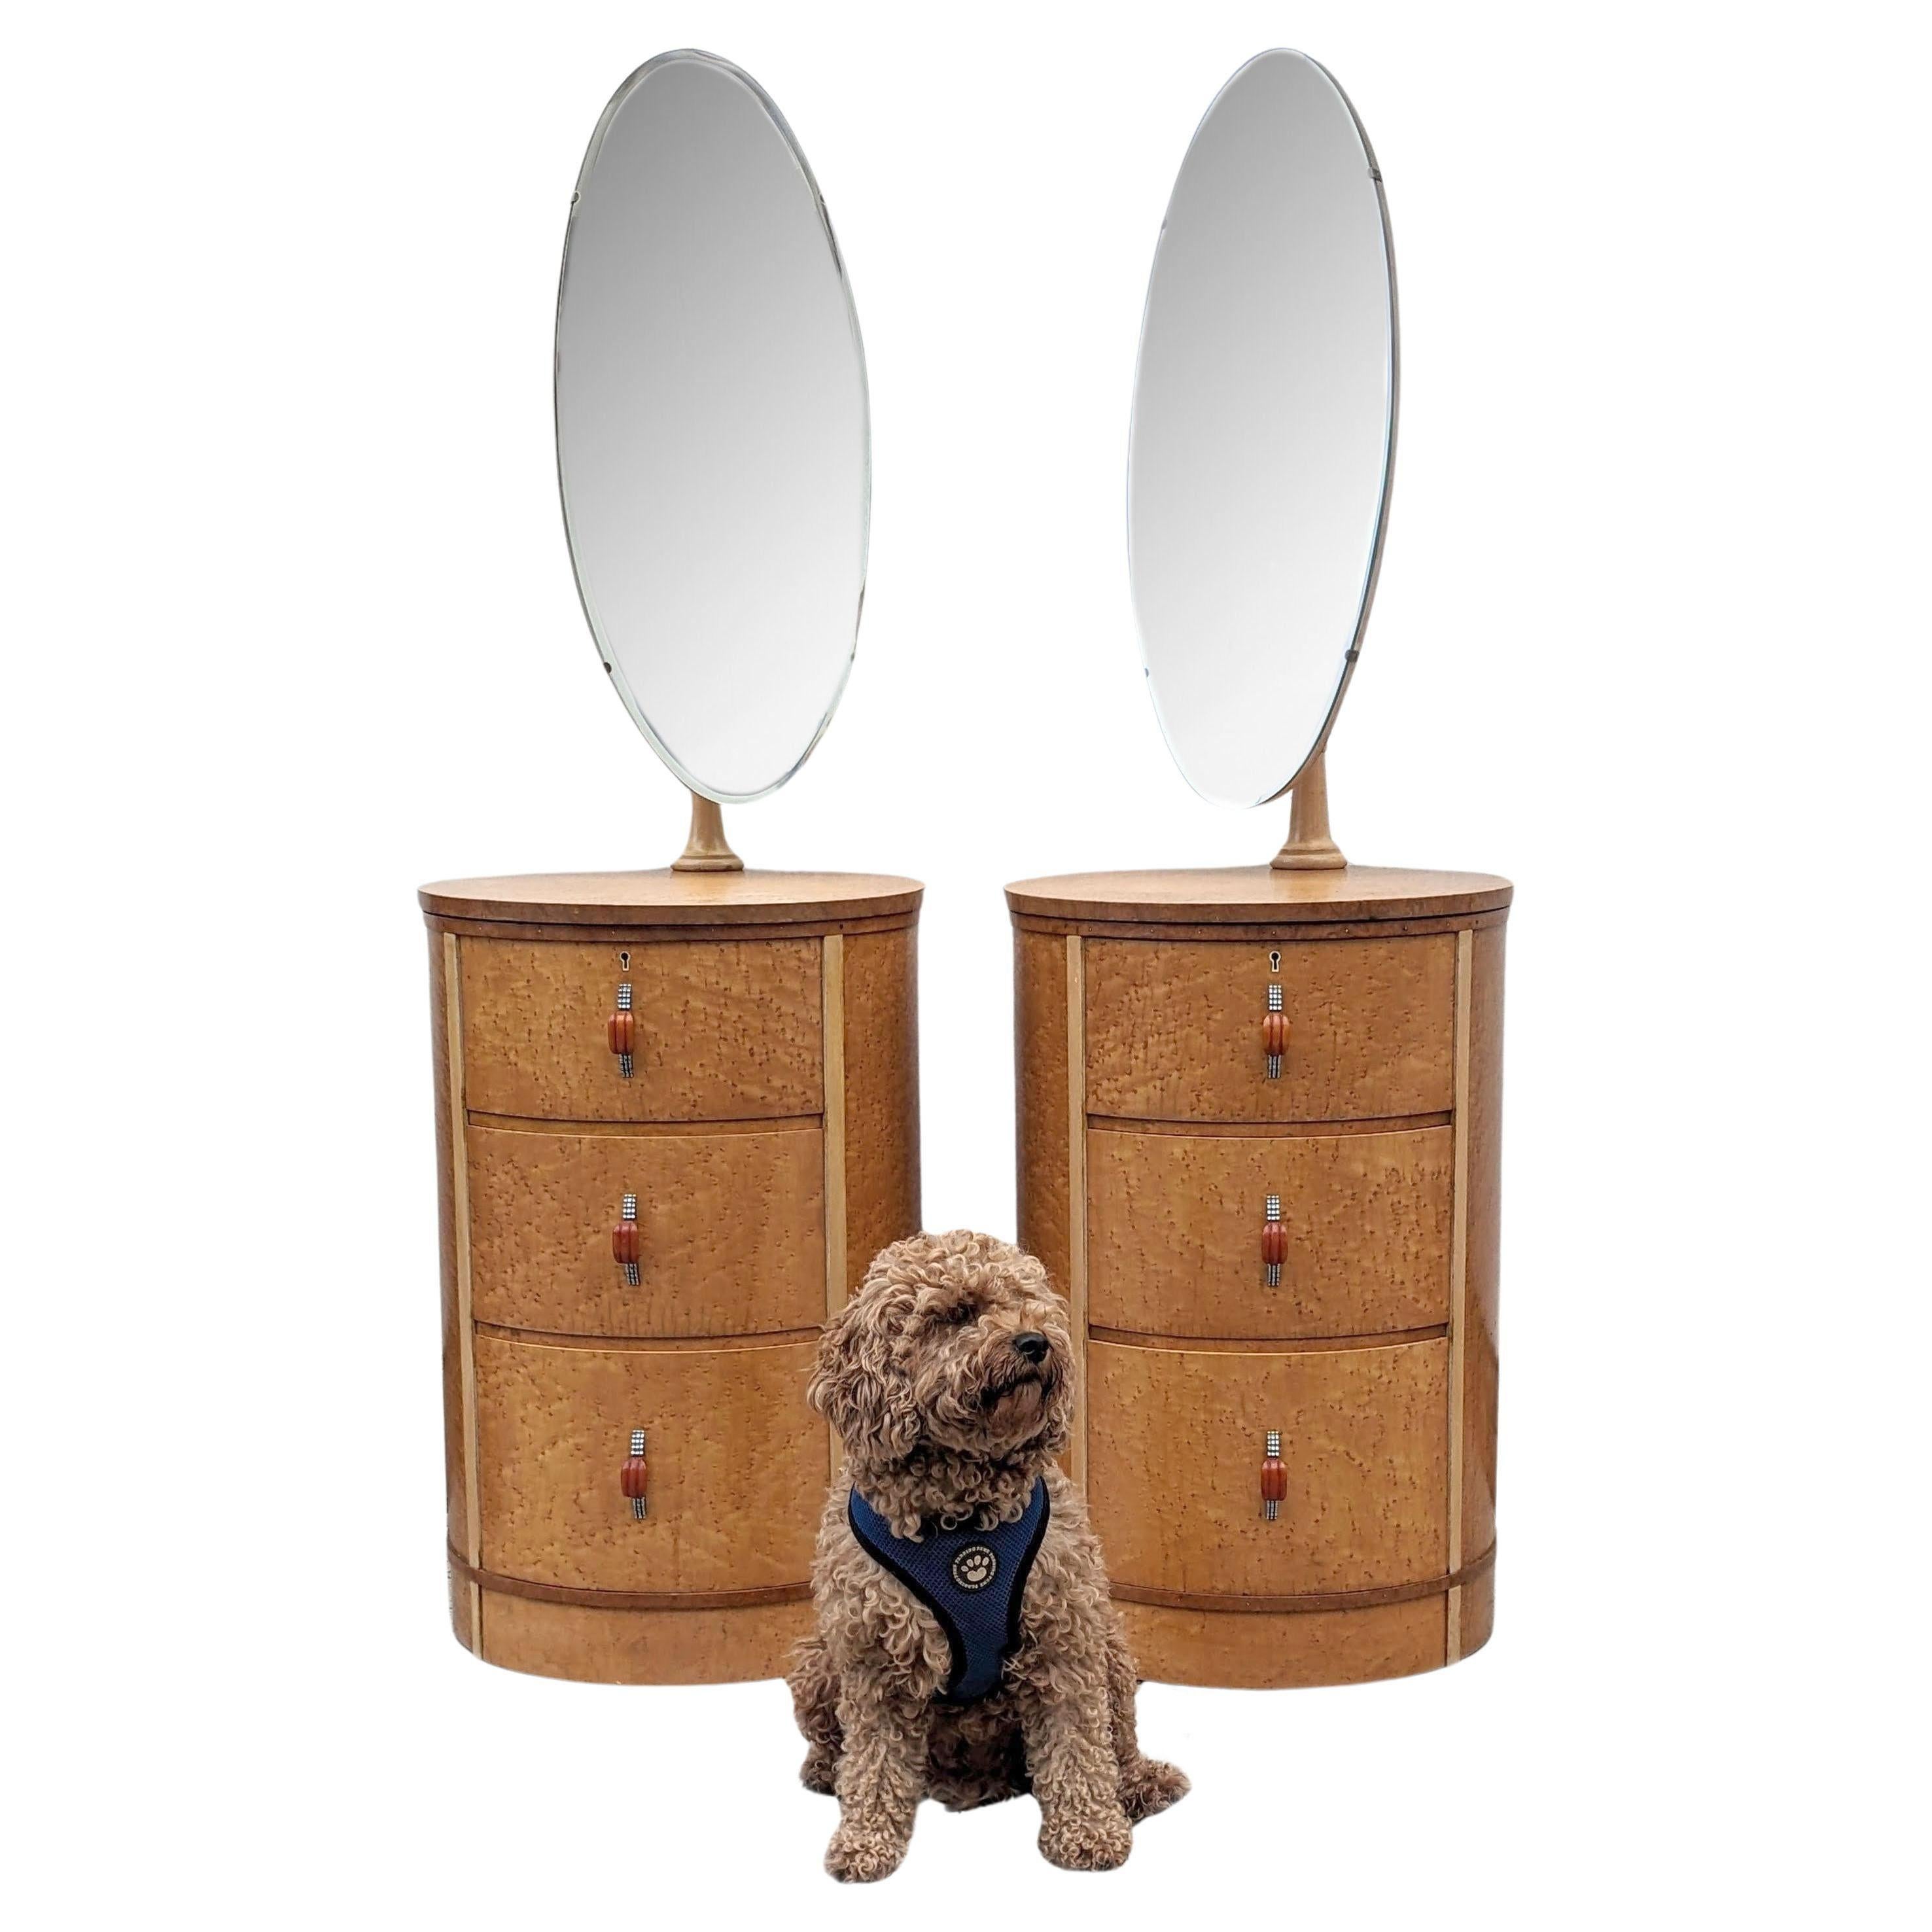 Art Deco Drum Shaped Maple Bedside Tables Night Stands With Mirrors, c1930 For Sale 2